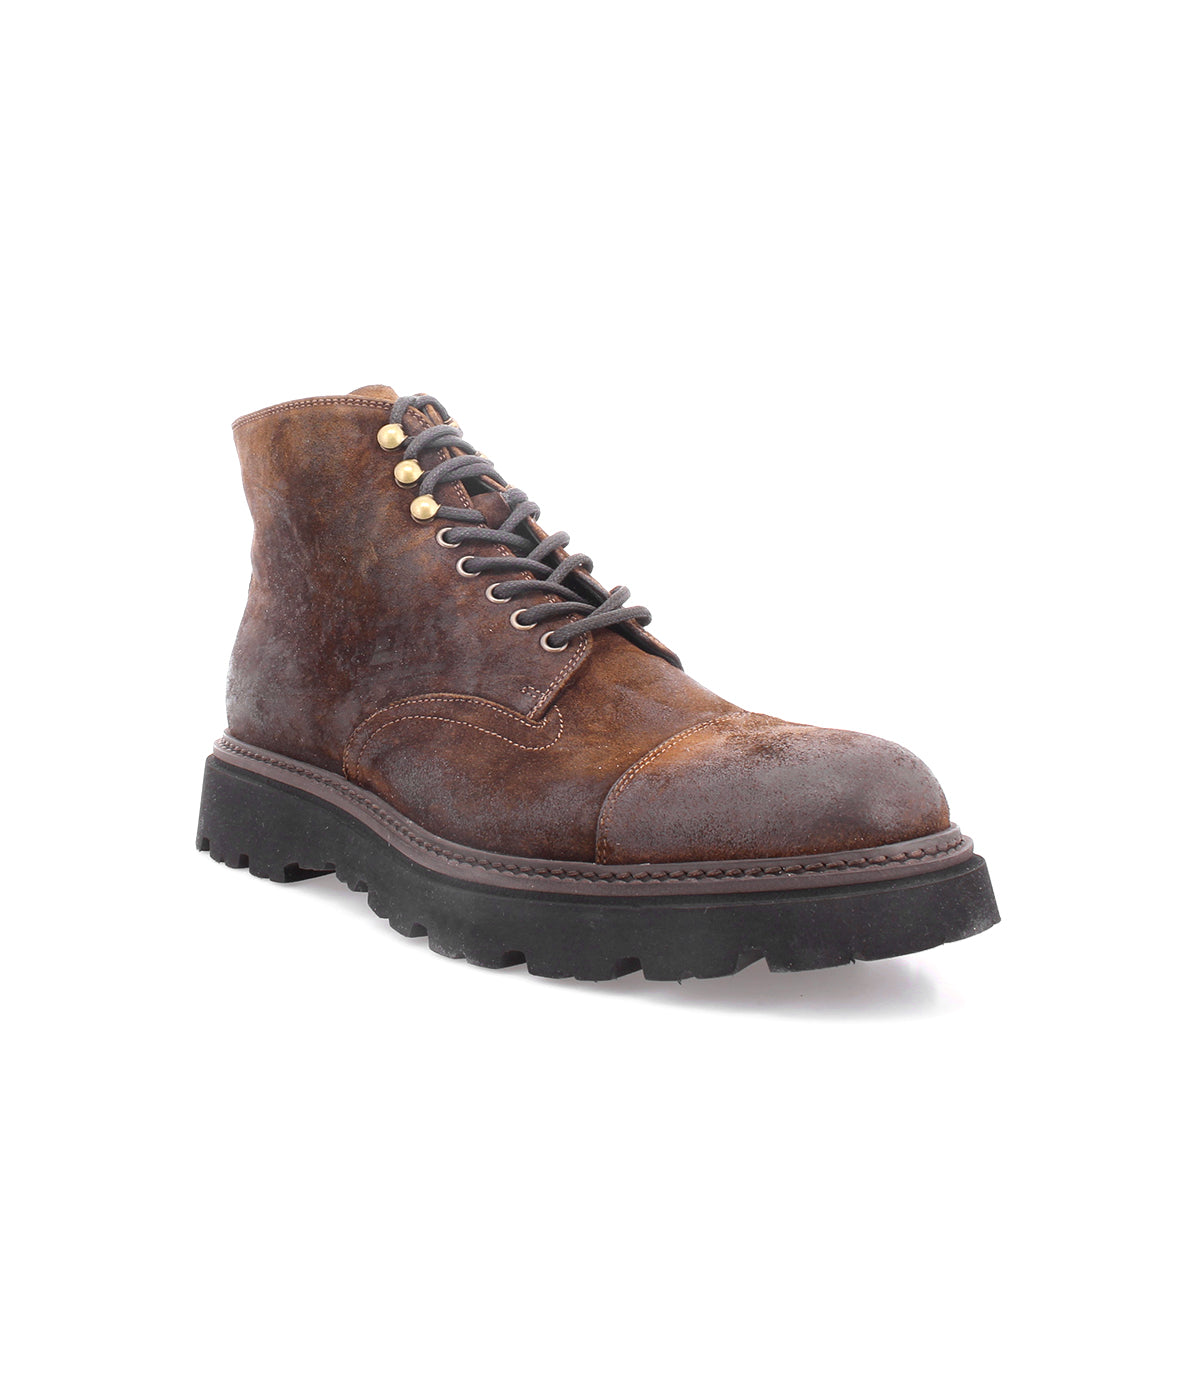 An Italian work-style boot, the Goer by Bed Stu, with oiled suede leather, known for its durability, featuring black soles.